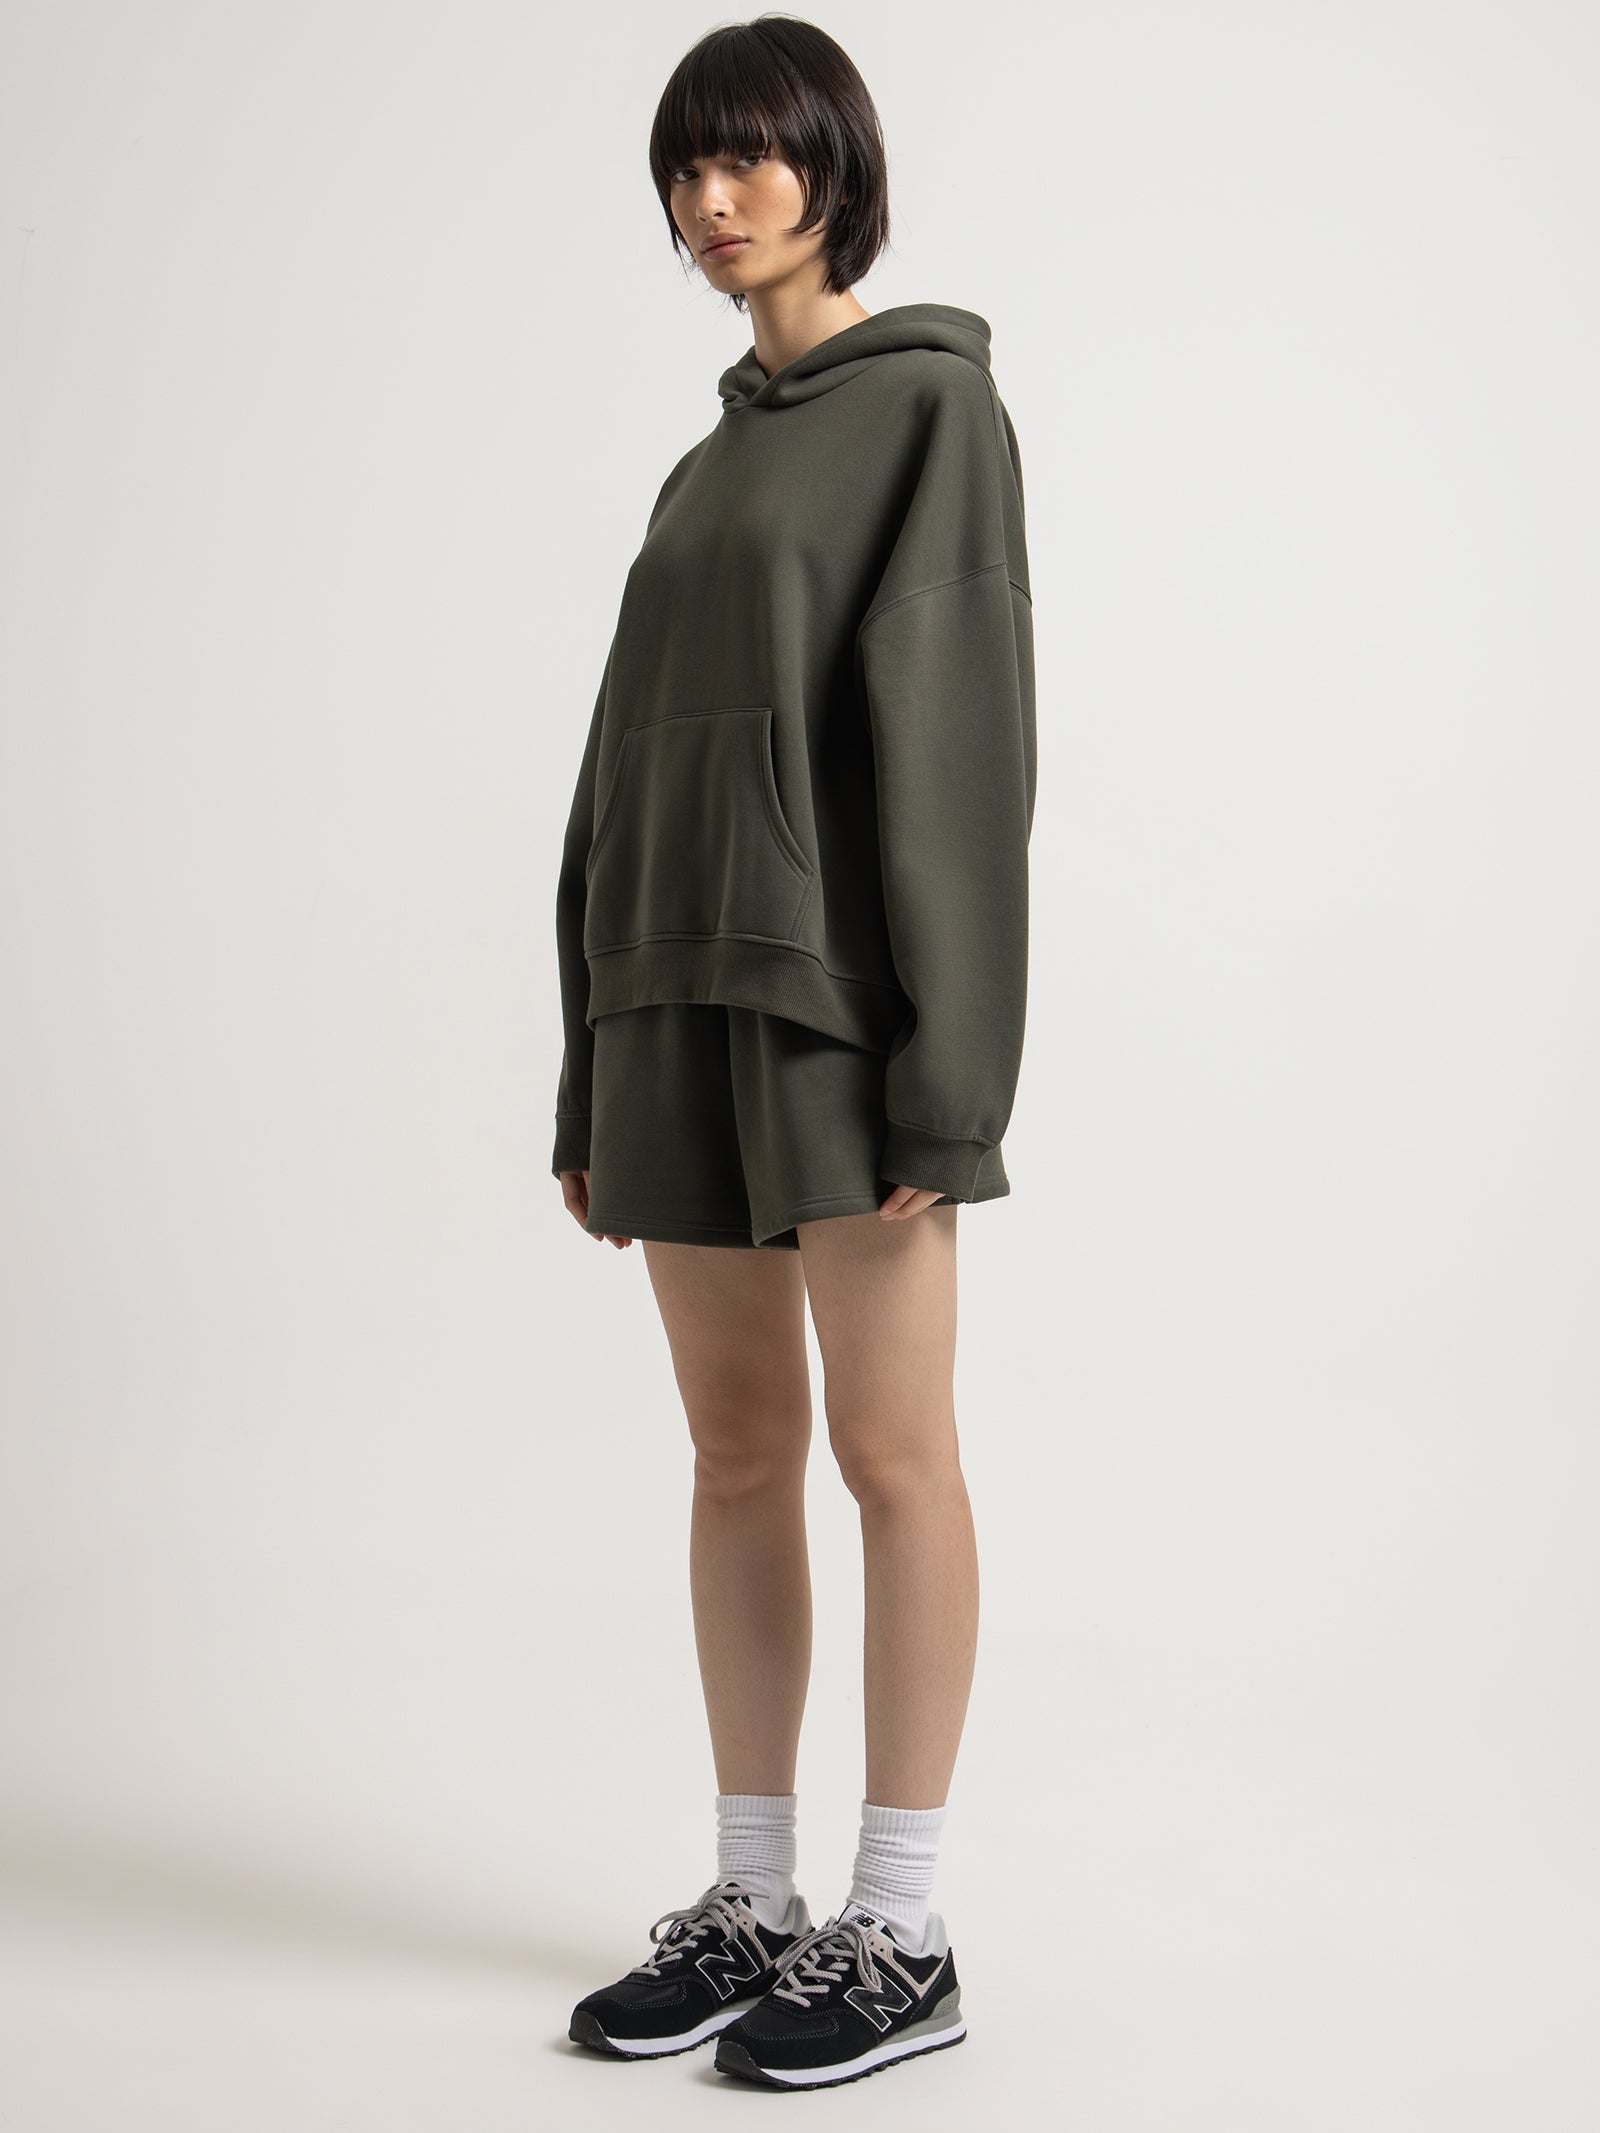 Carter Curated Shorts in Hunter Green